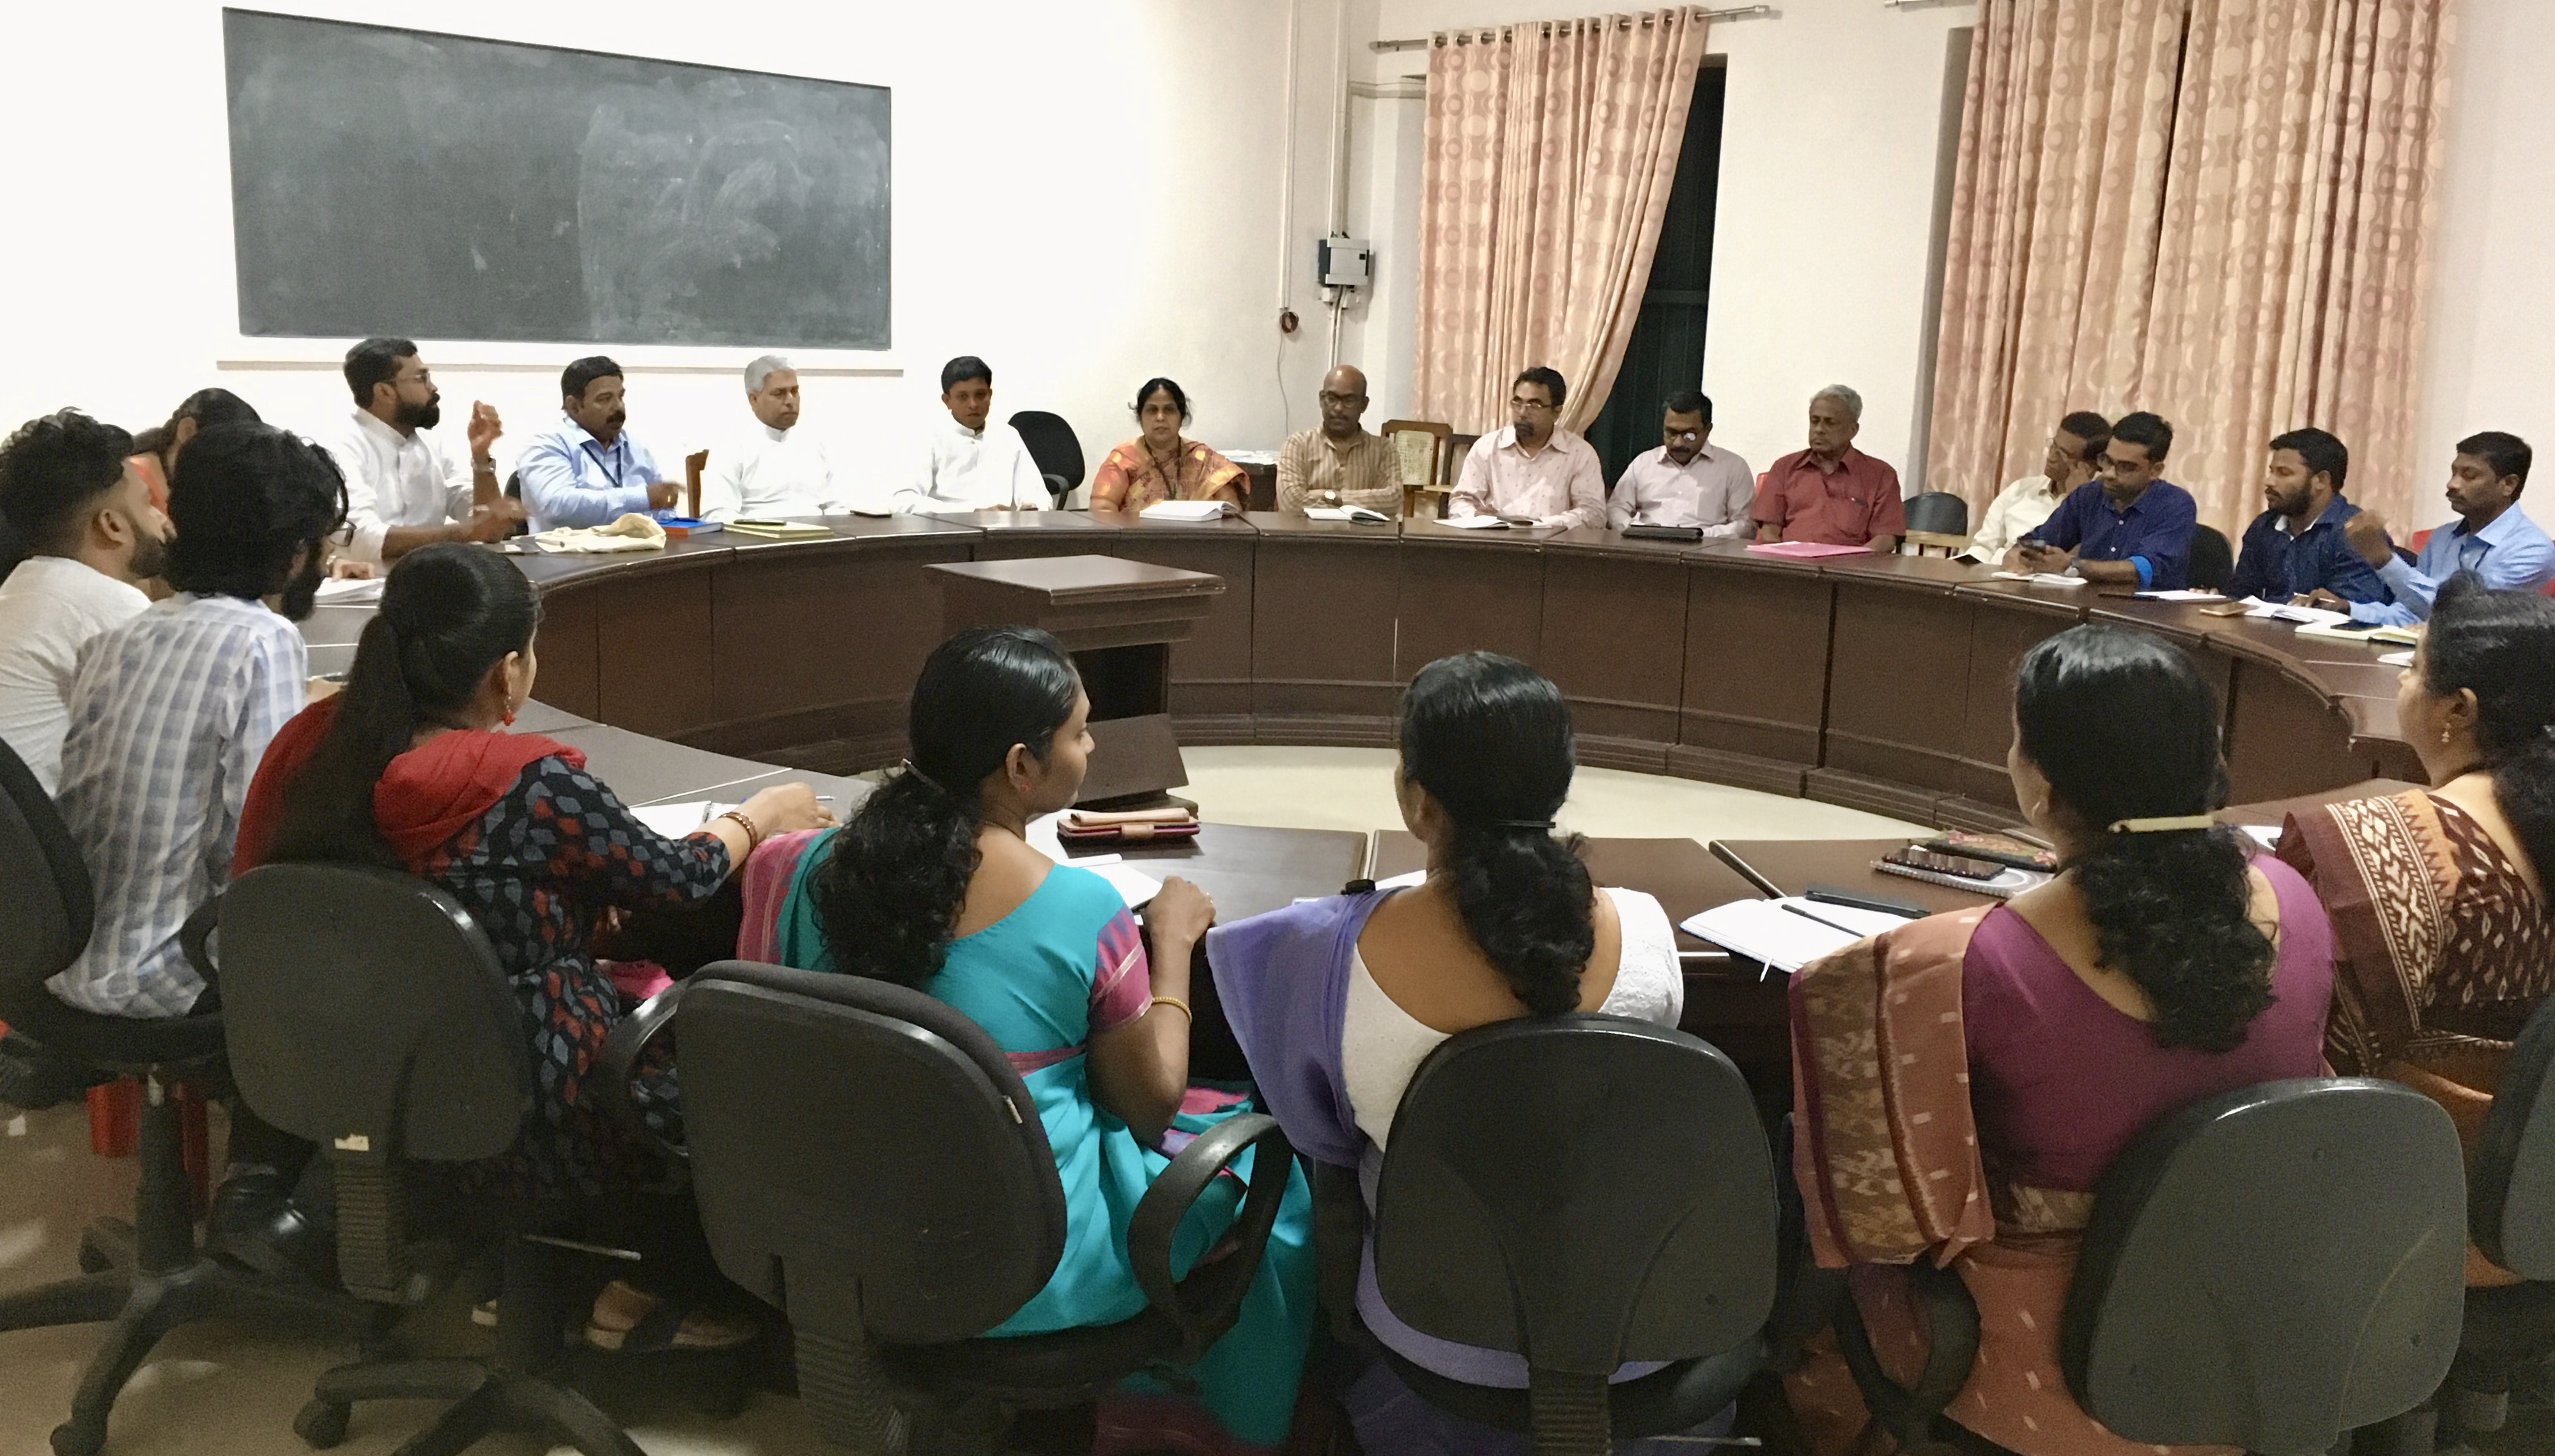 St. Albert’s College (Autonomous) Extended Executive Meeting  held on 11th November 2019